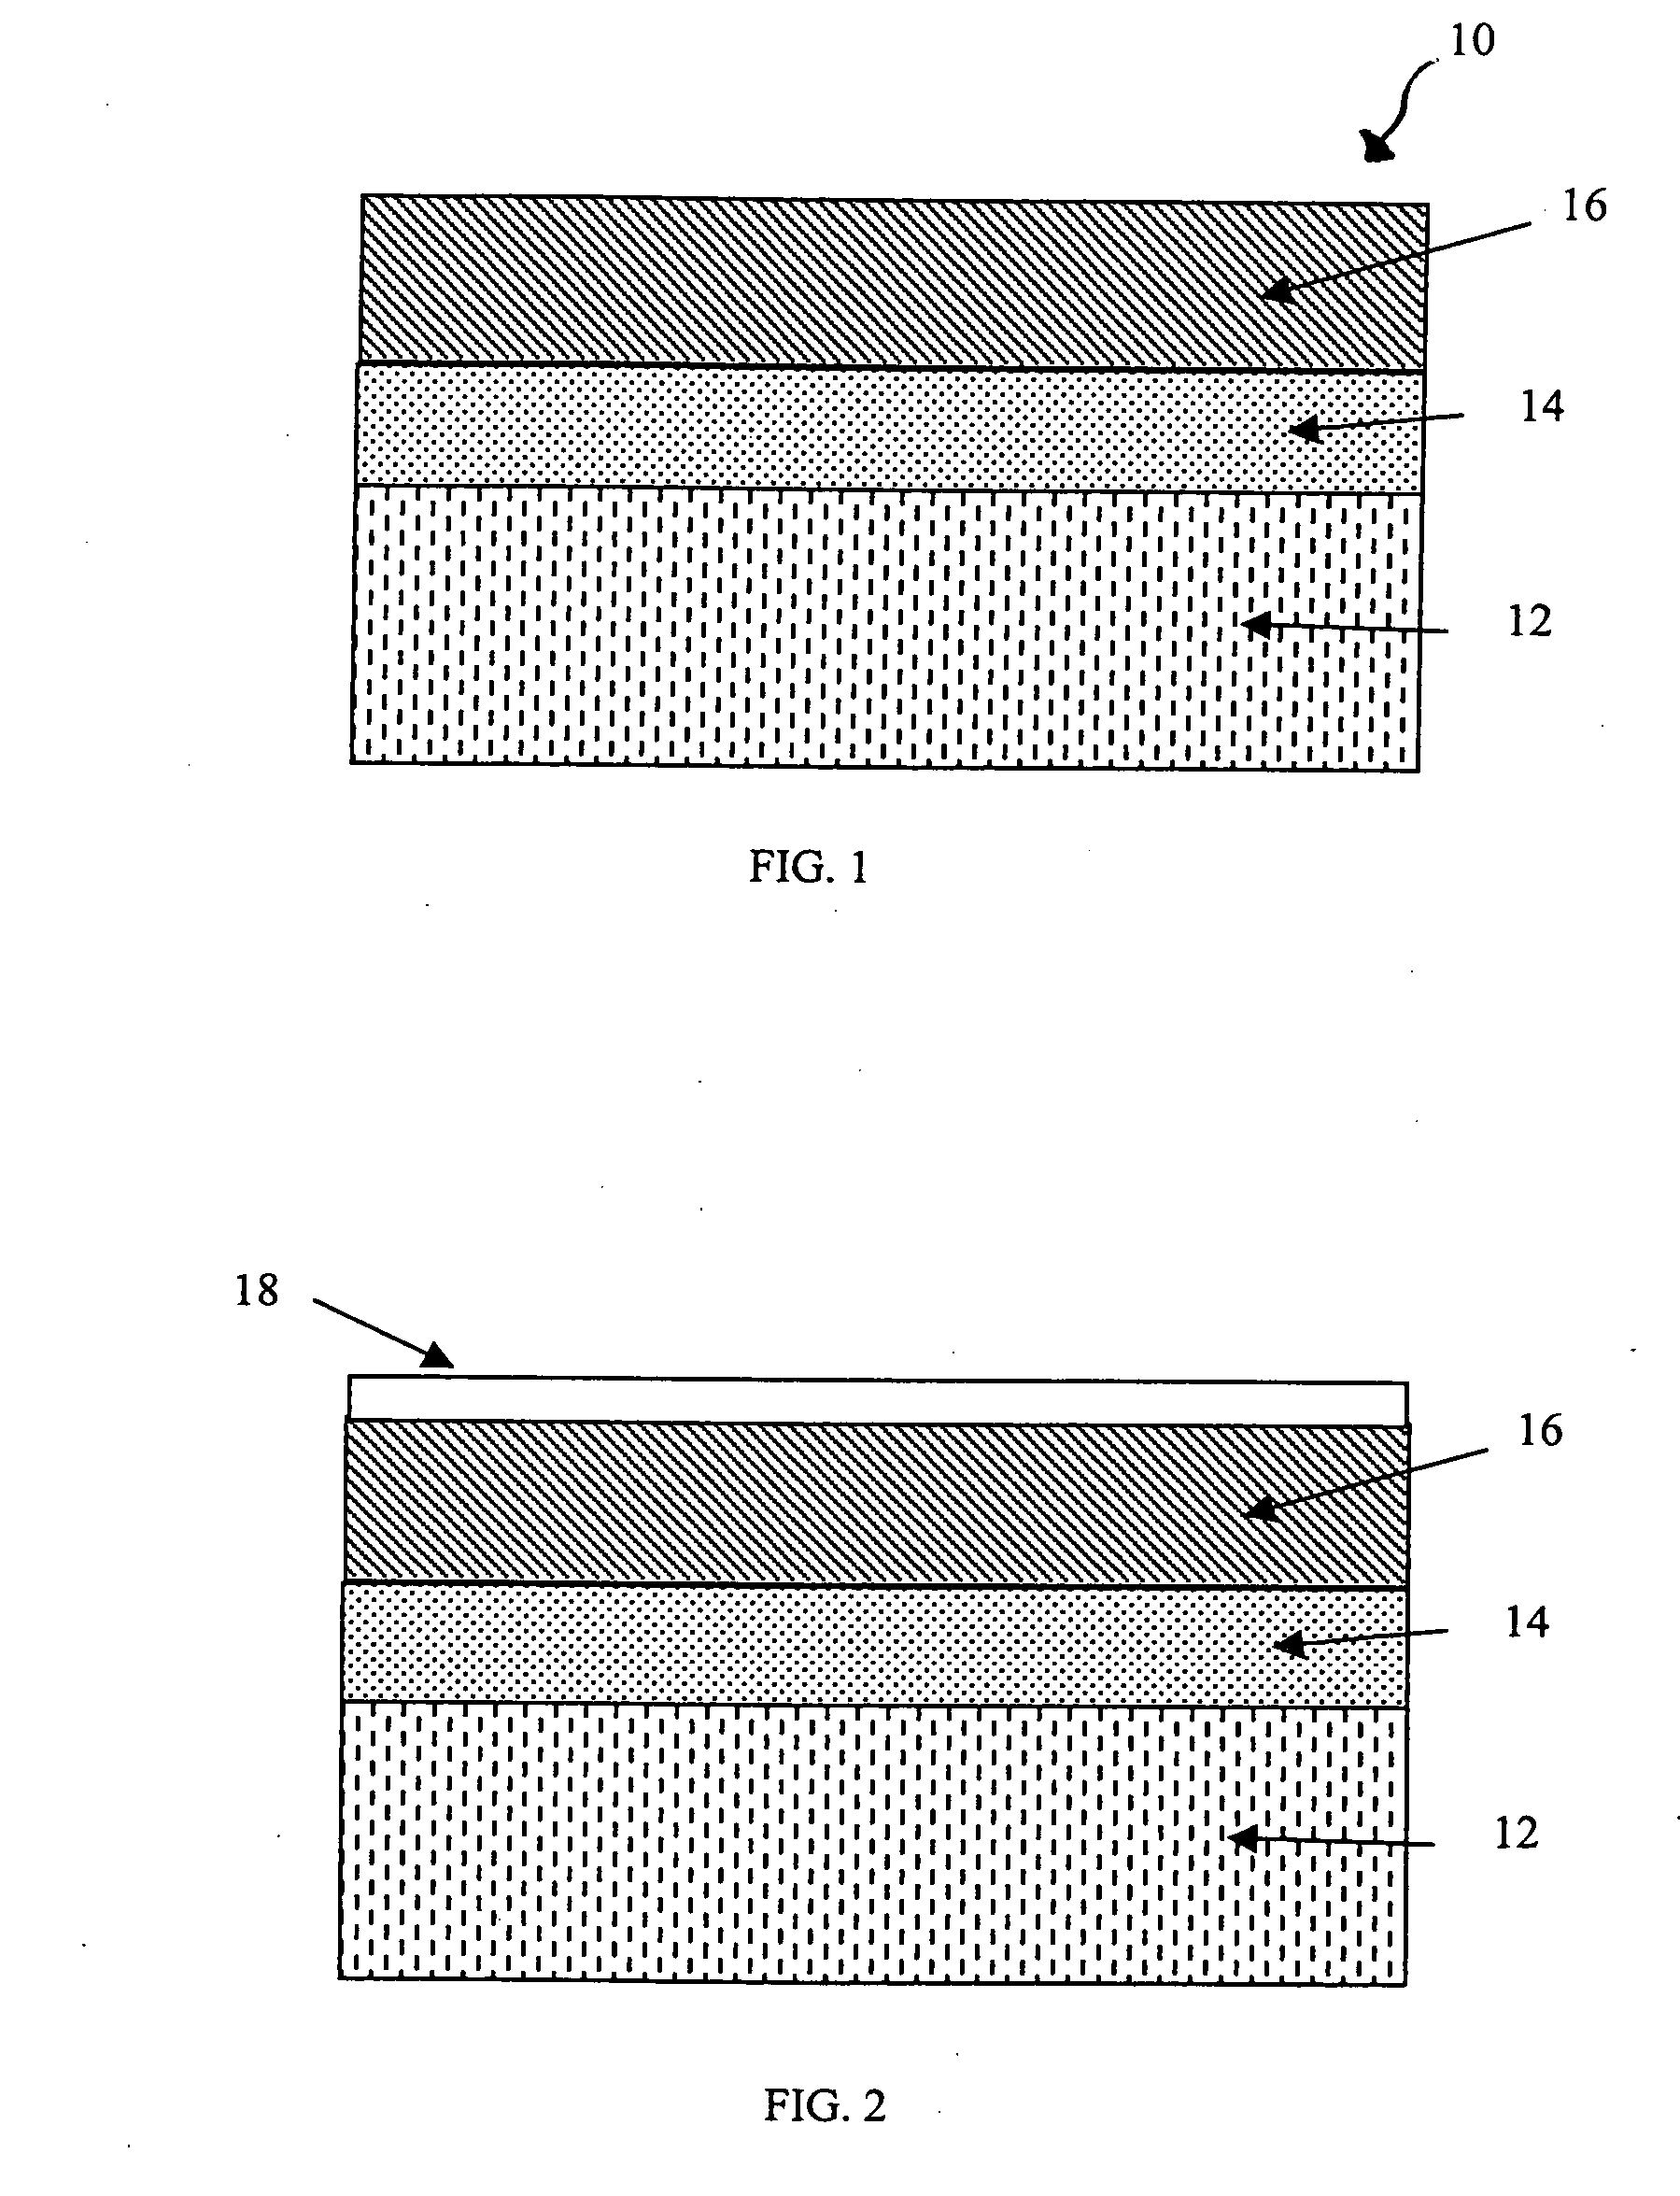 Hybrid orientation CMOS with partial insulation process